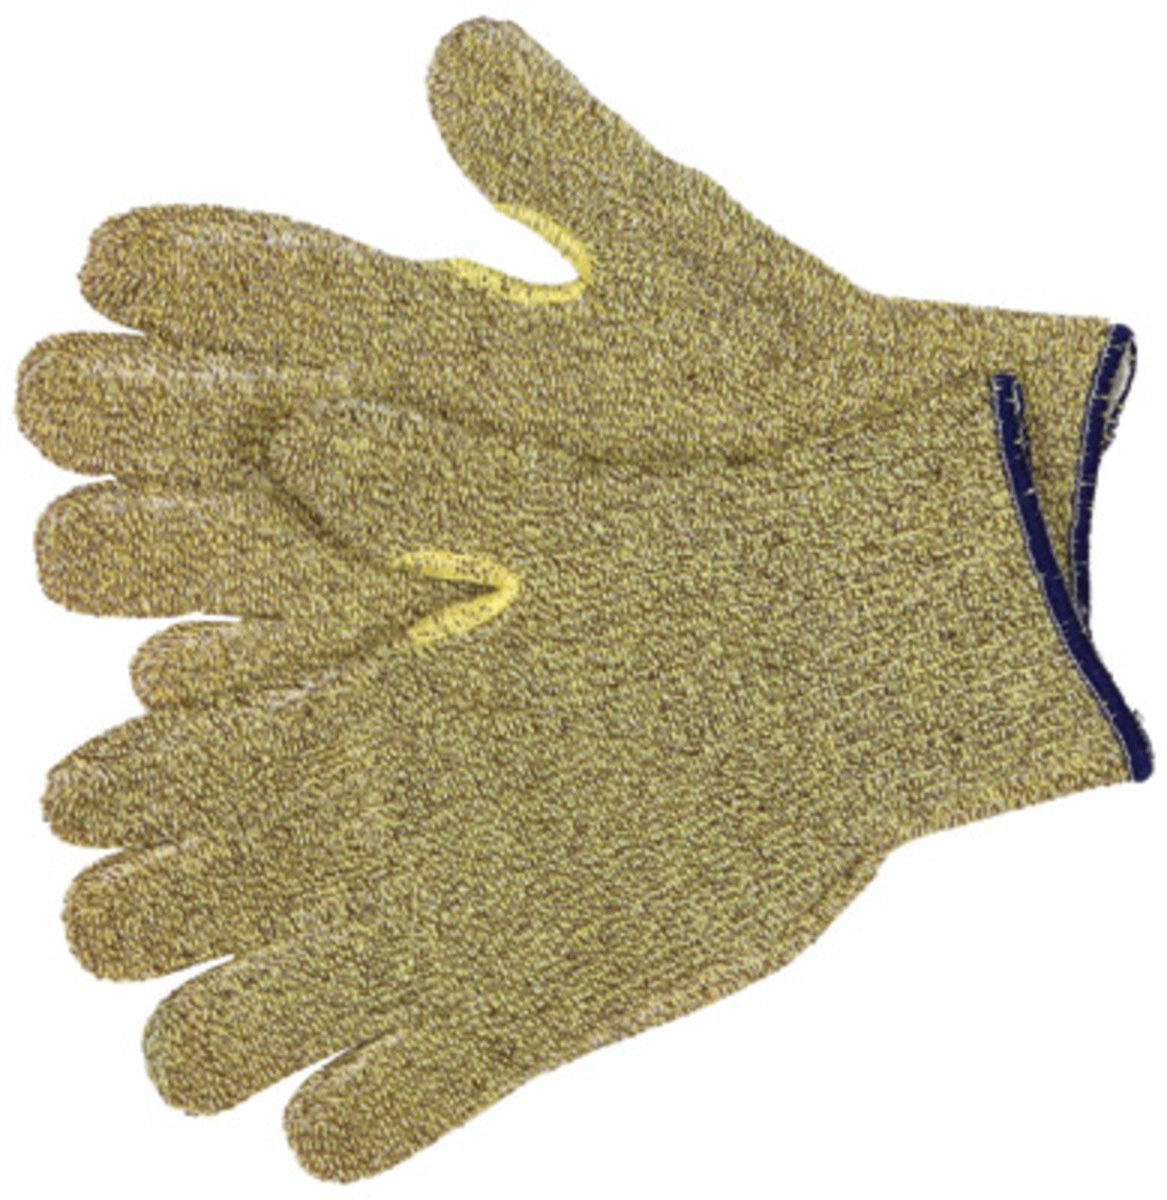 Memphis Glove Small Brown And Yellow 7 Gauge Regular Weight Kevlar® Cotton Blend Terry Cloth Heat Resistant Gloves With Reinforc